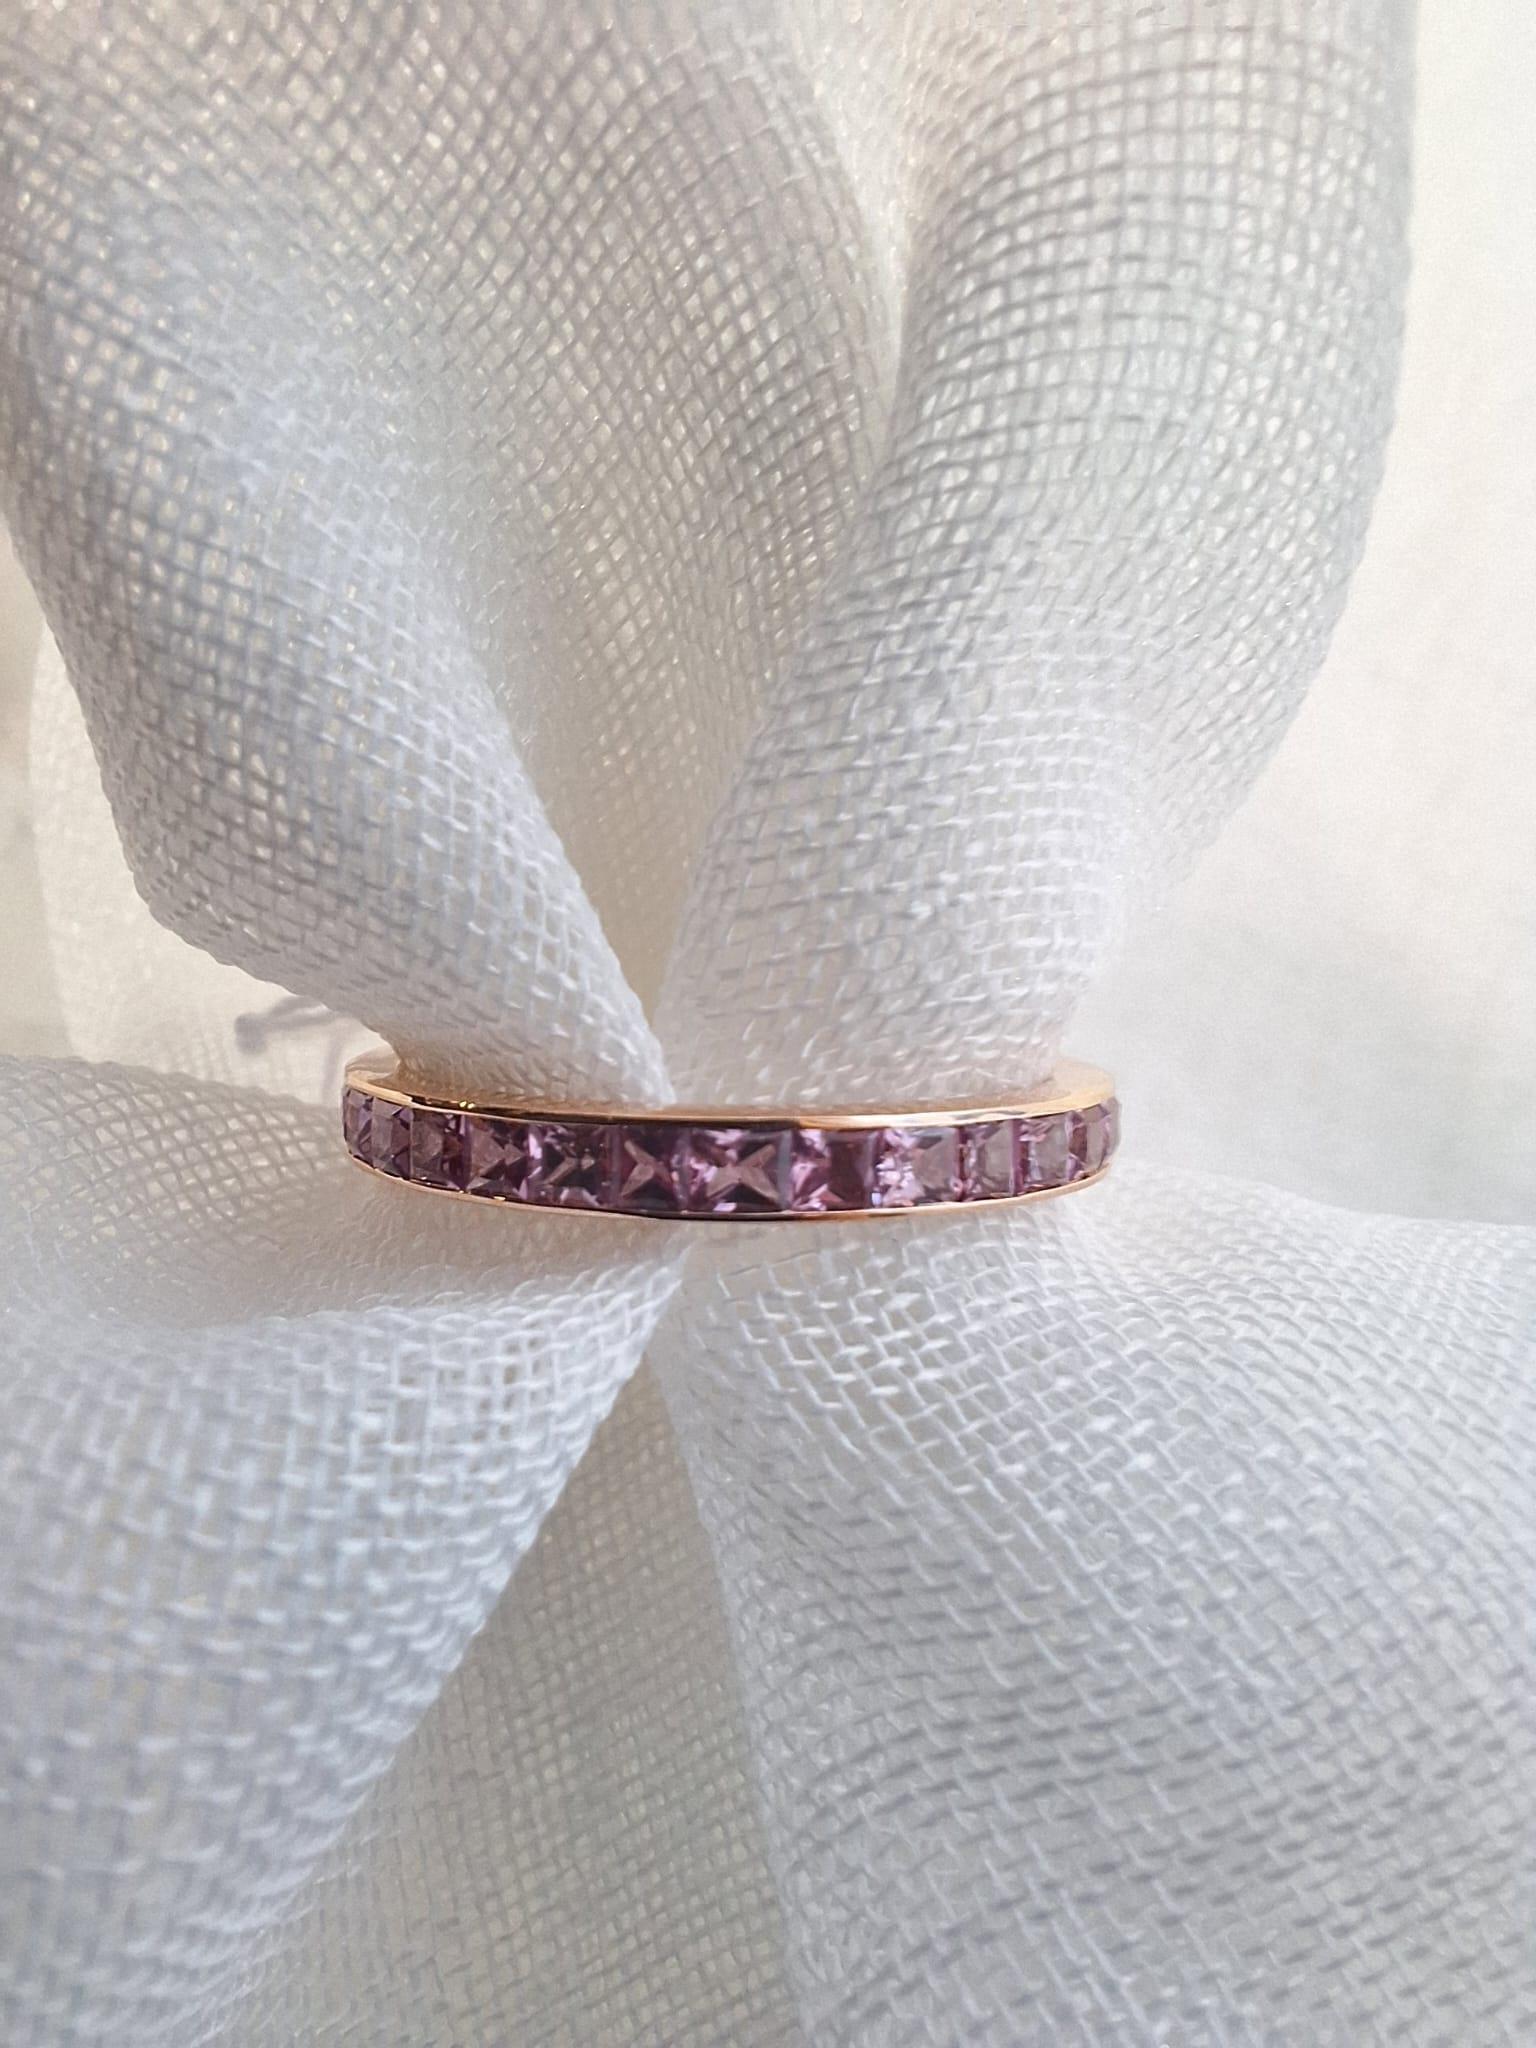 GILIN 18K Rose Gold Ring with Pink Sapphire

Pink sapphires are recognized as having a variety of meanings, symbolizing good fortune, power through hardships, intense love and compassion, and subtle elegance.

The ring setting with pink sapphire